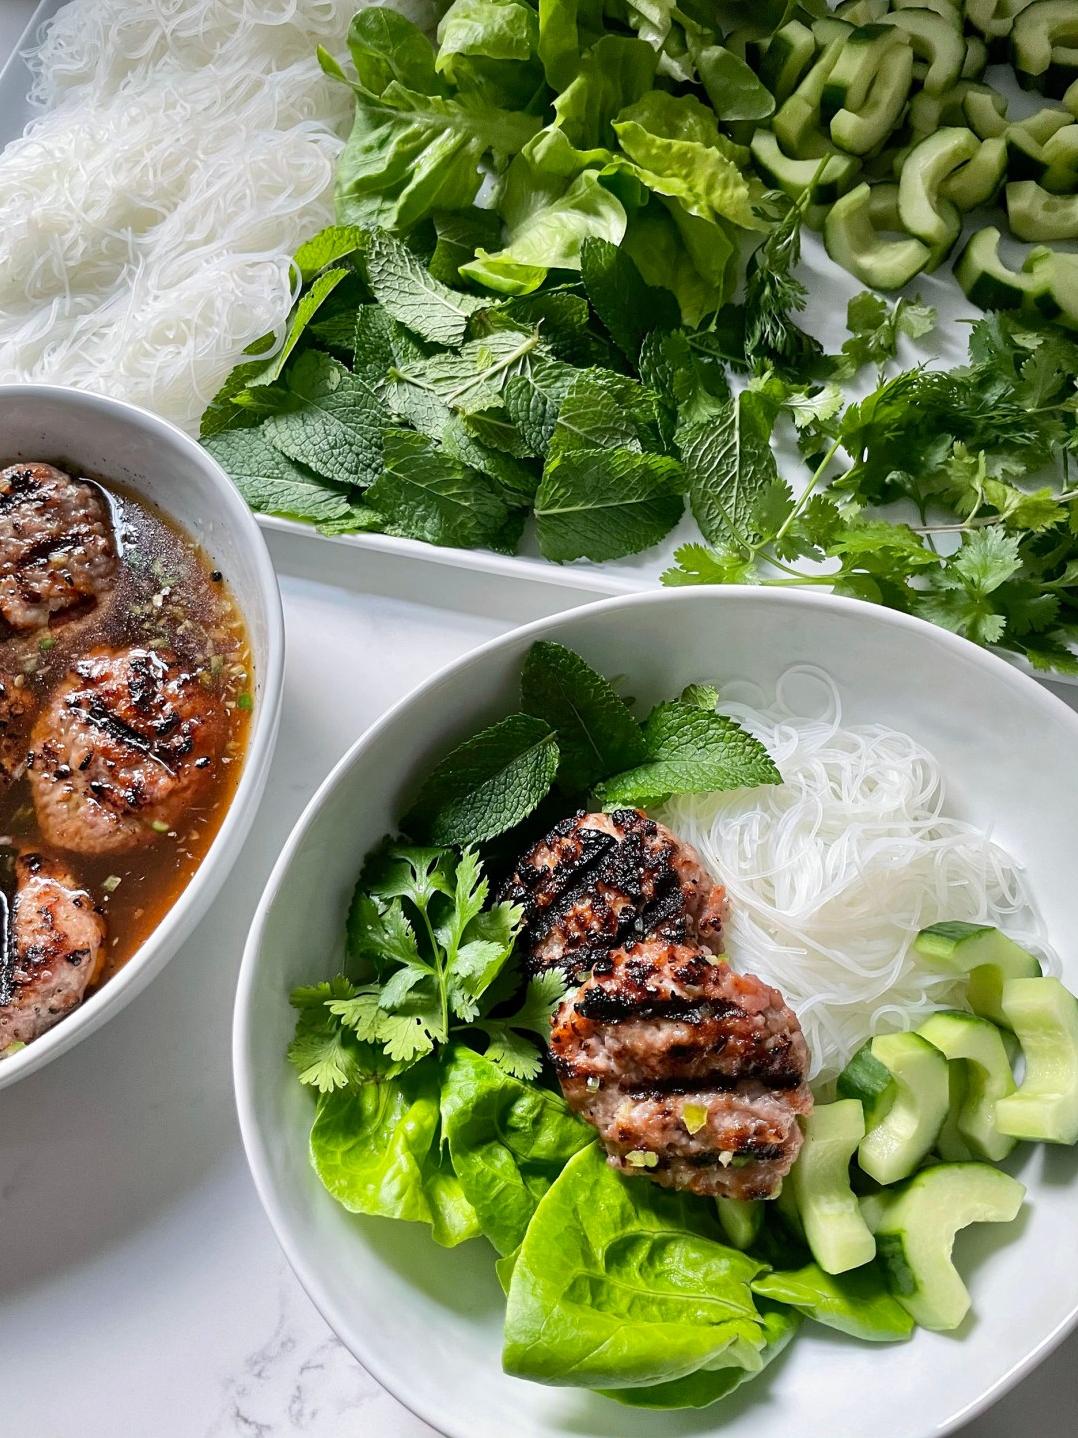  Juicy and flavorful pork patties, paired perfectly with the freshness of rice noodles and salad.